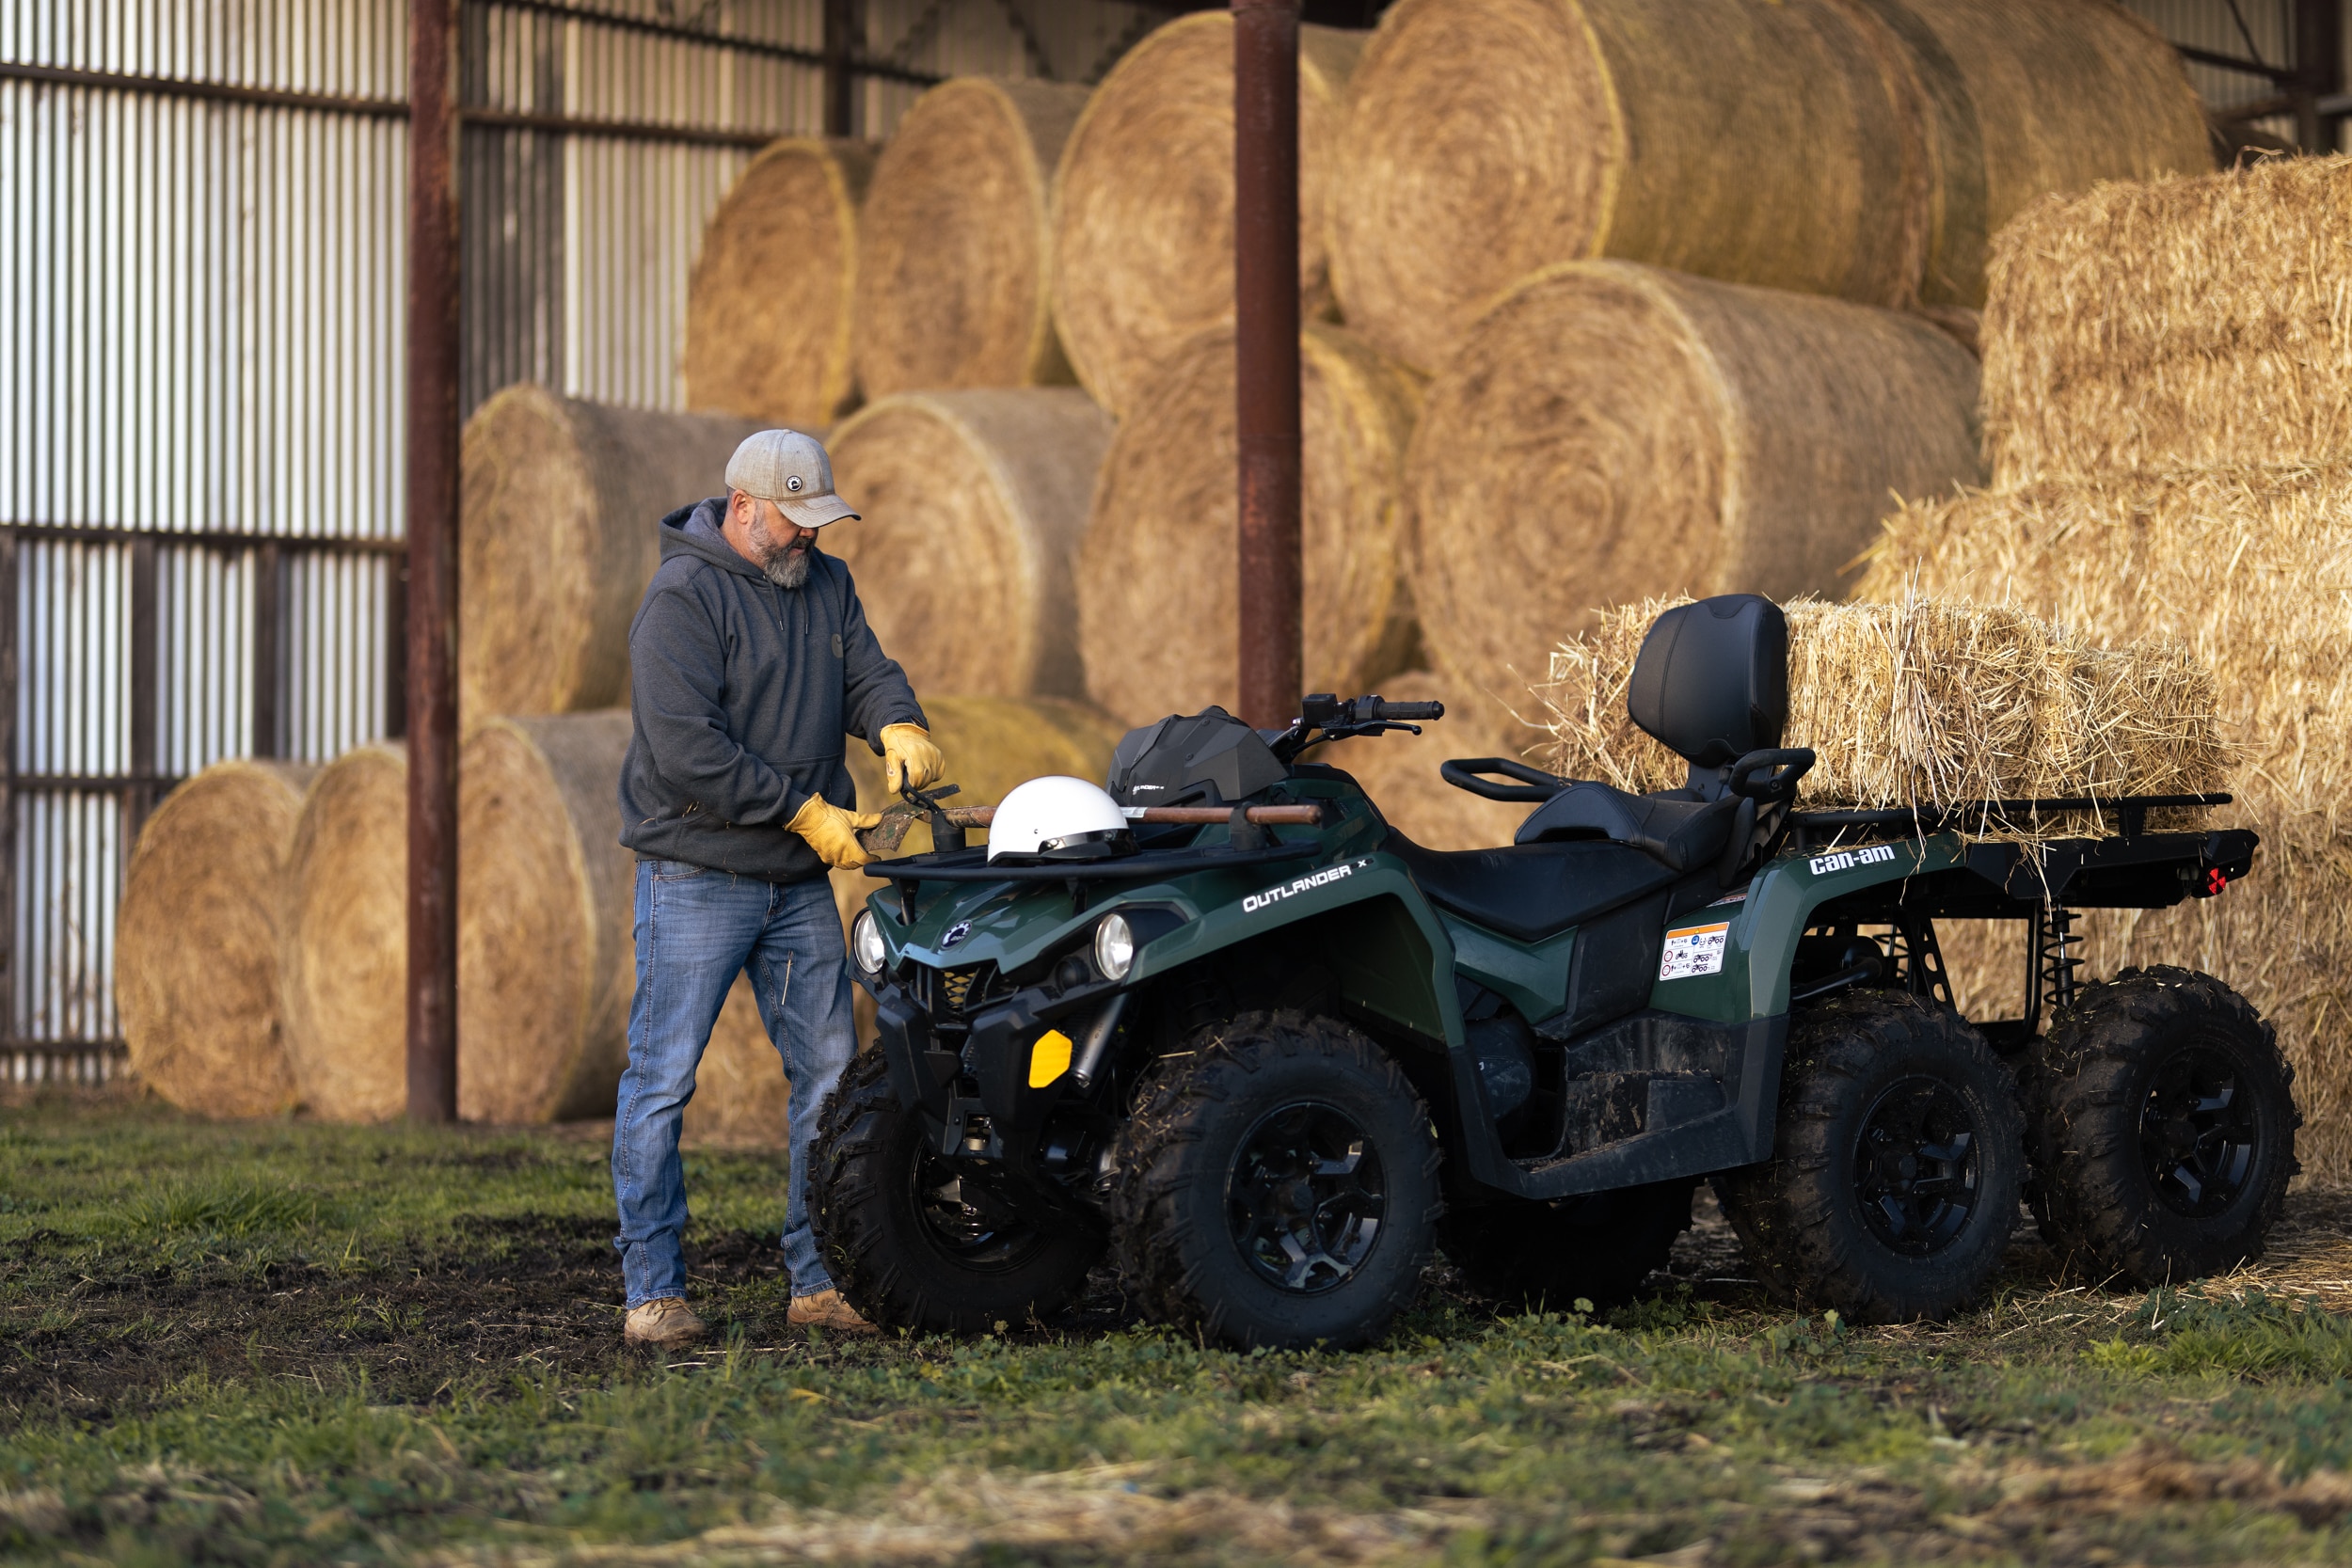 Farmer loading up his Can-Am Outlander 6x6